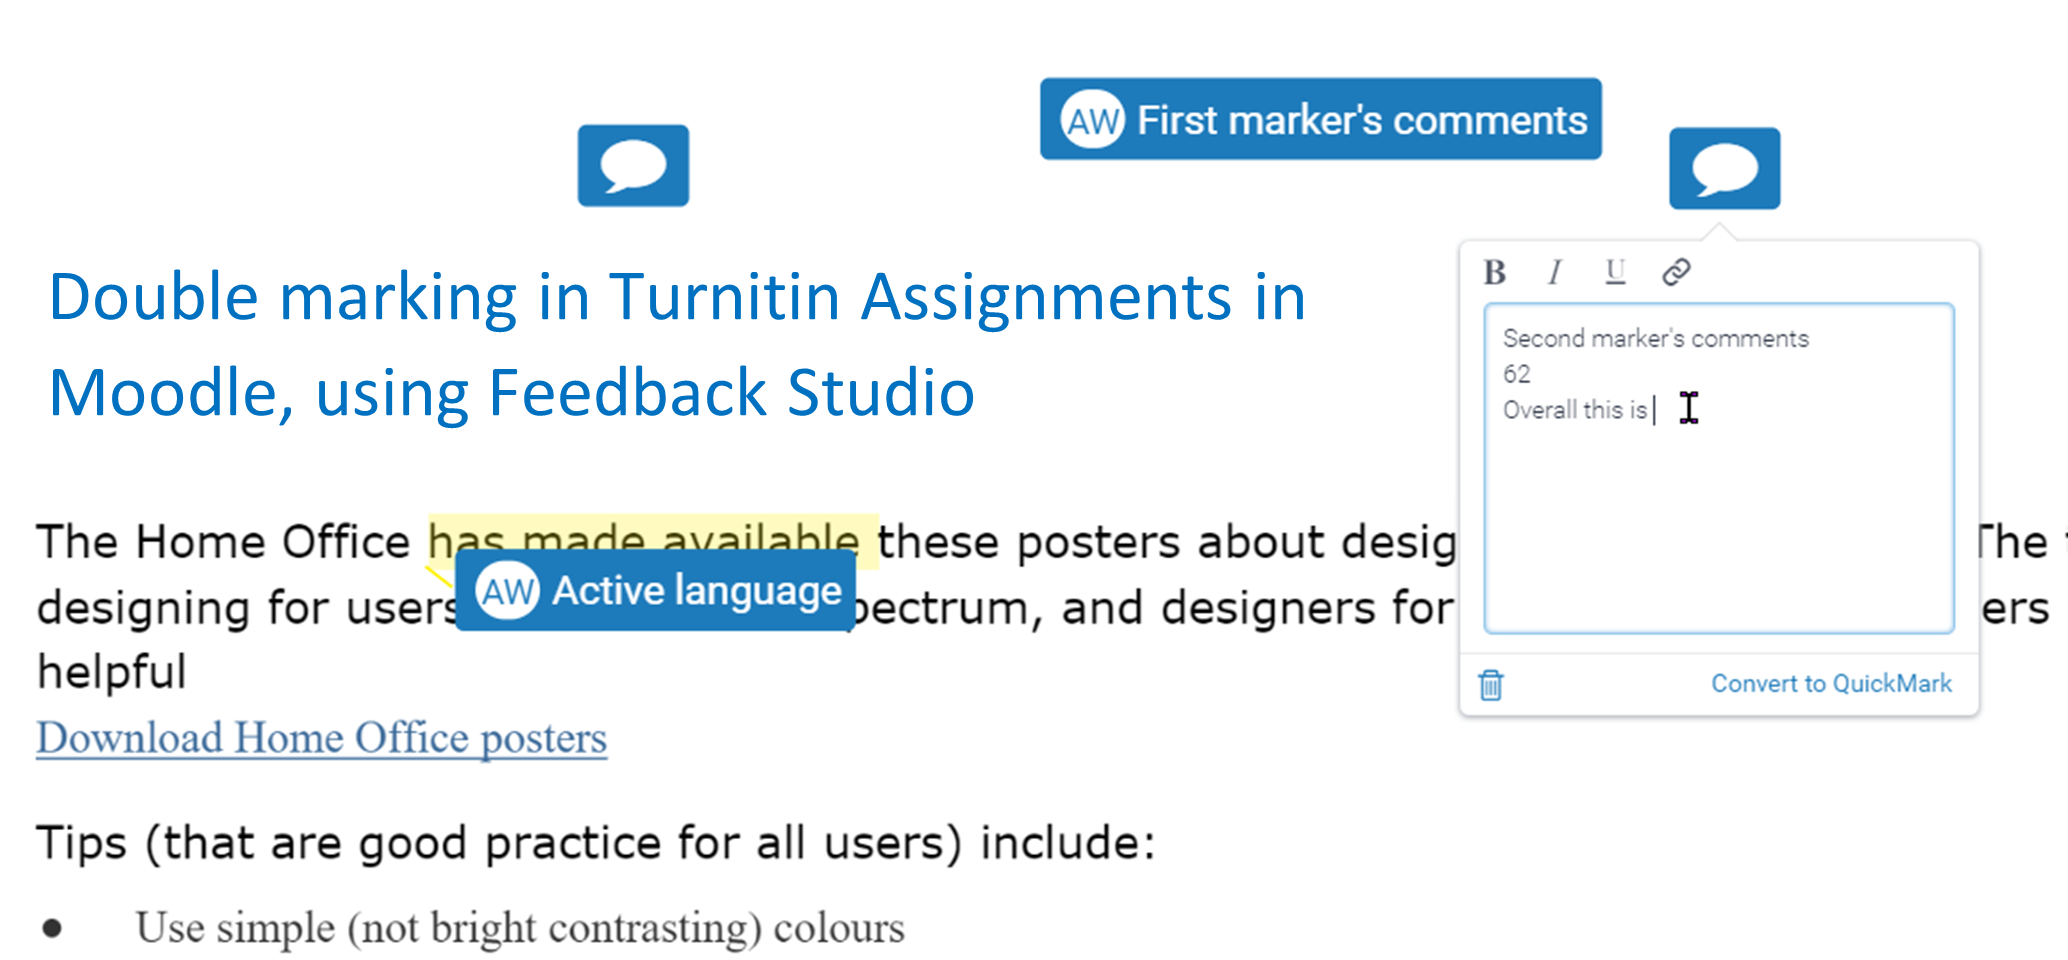 Double Marking in Turnitin Assignments